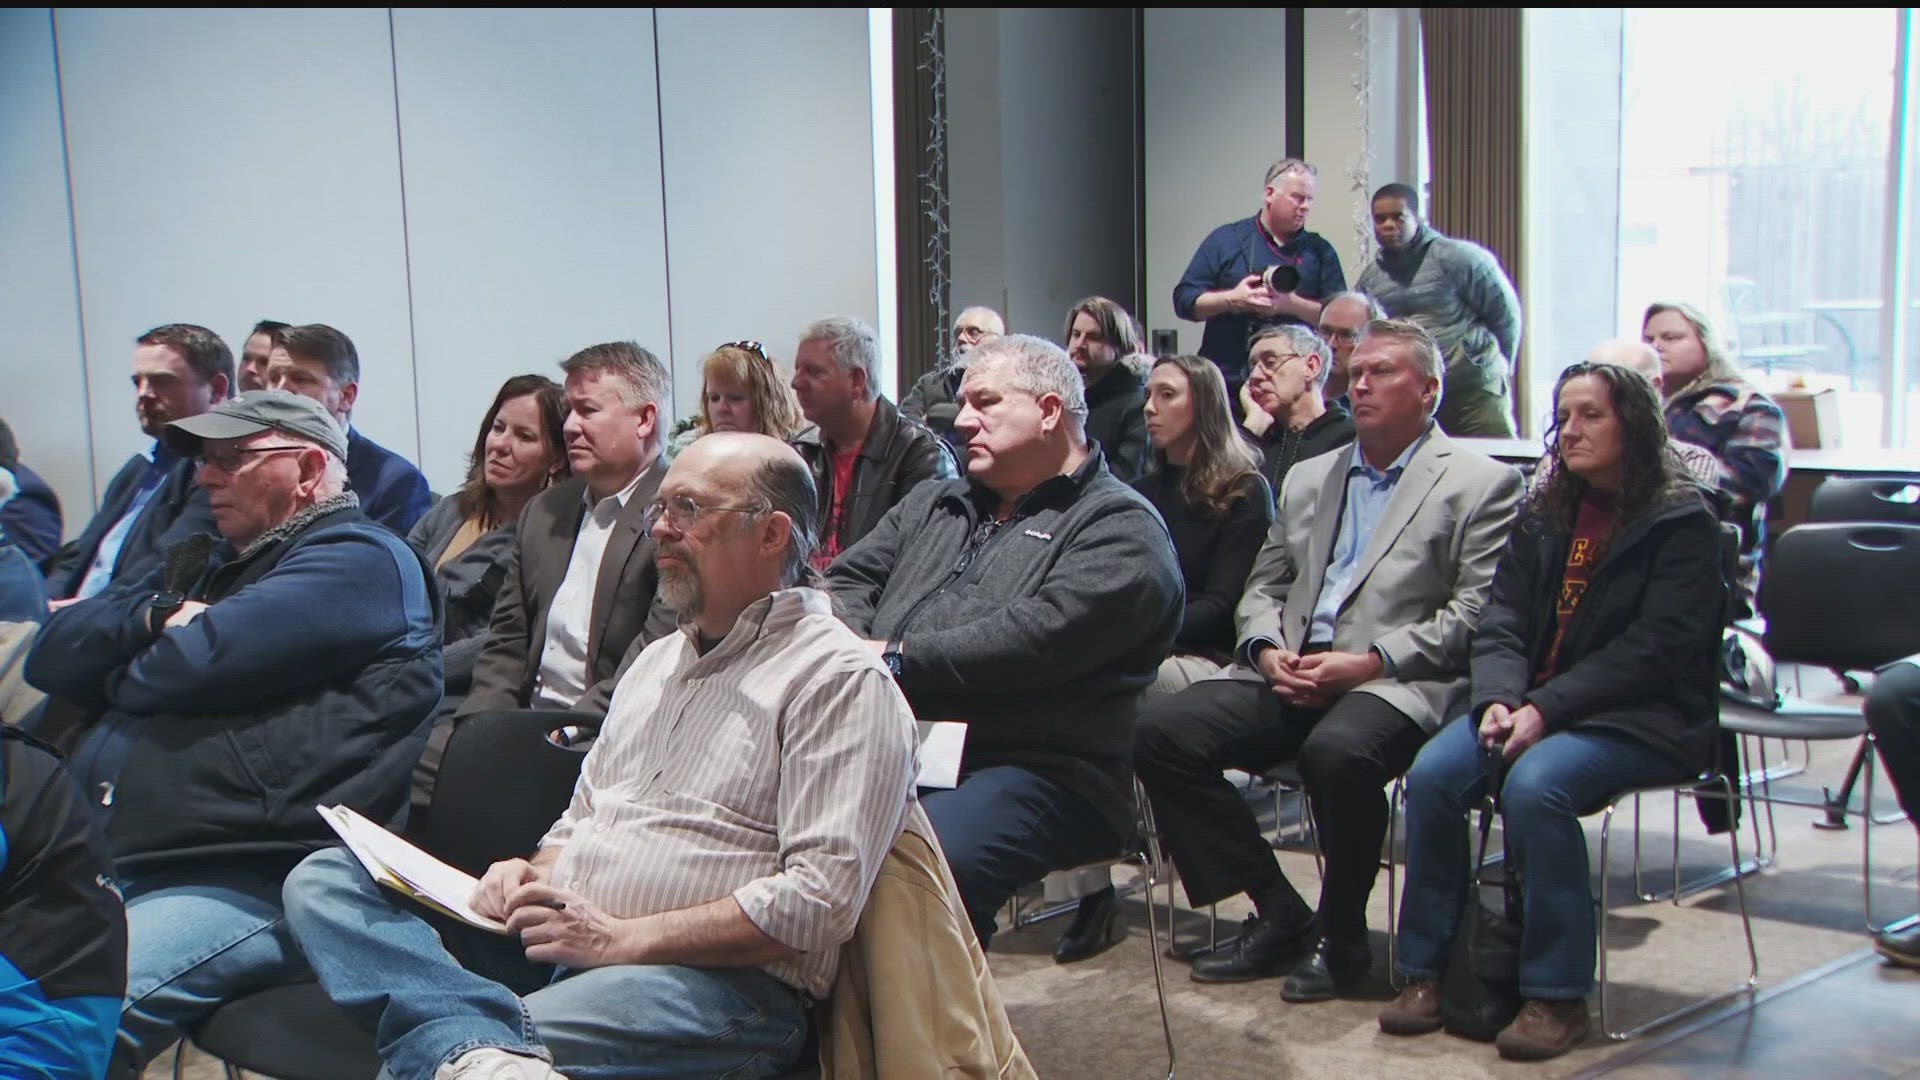 A public meeting was held in Monticello with the U.S. Nuclear Regulatory Commission regarding the leak of tritium.